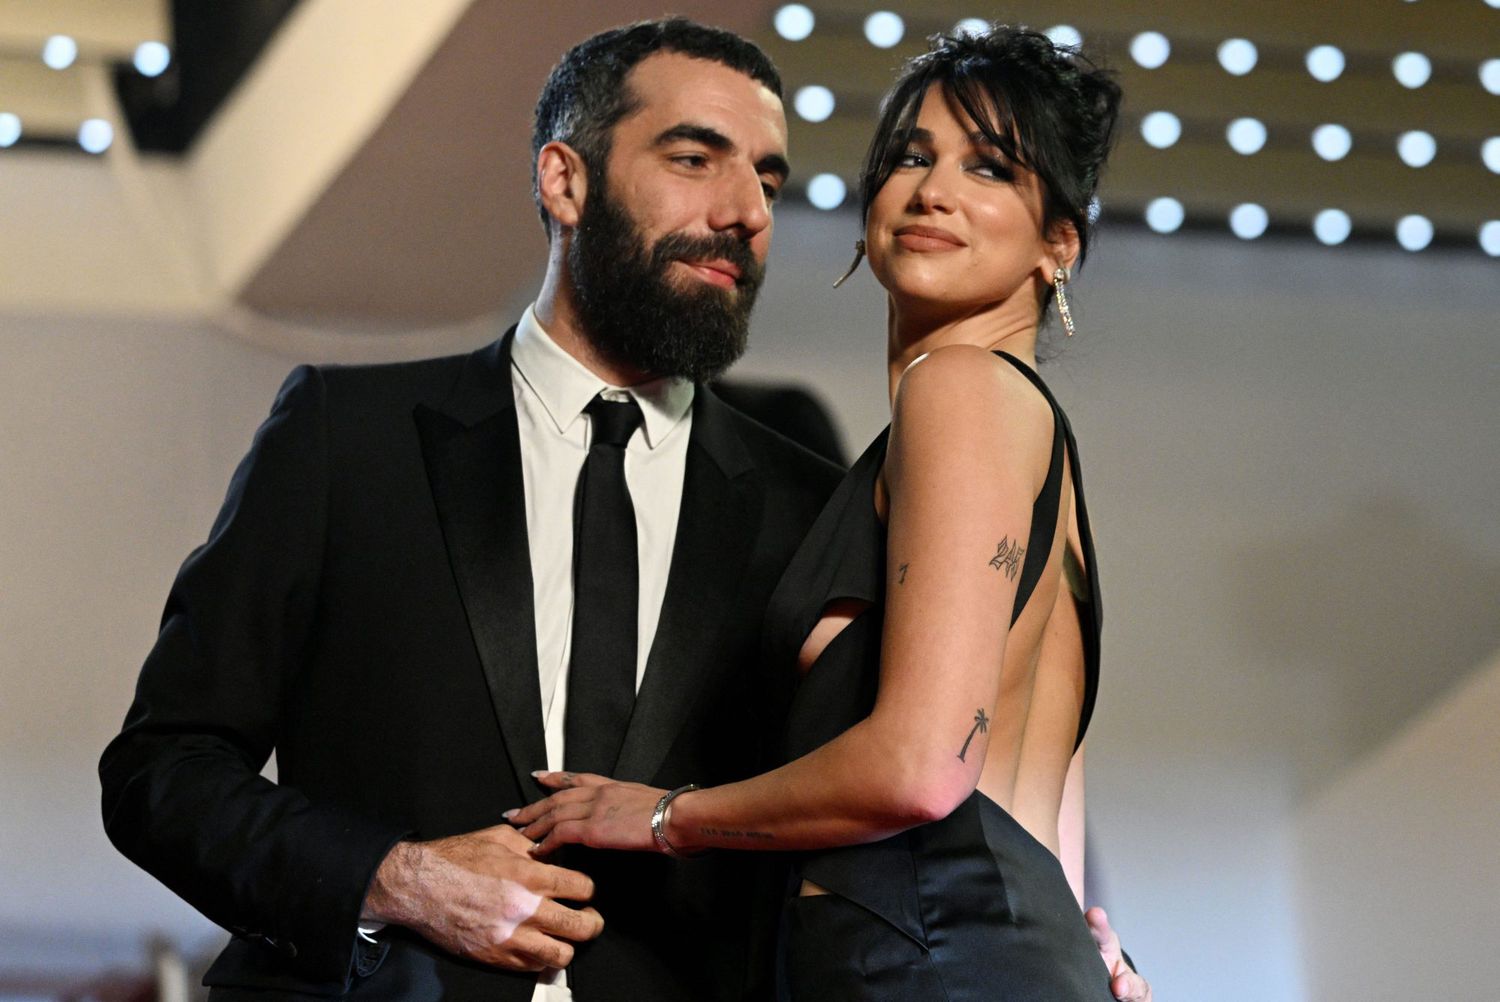 Dua Lipa and Romain Gavras: A Love Story That Will Leave You Speechless! 13